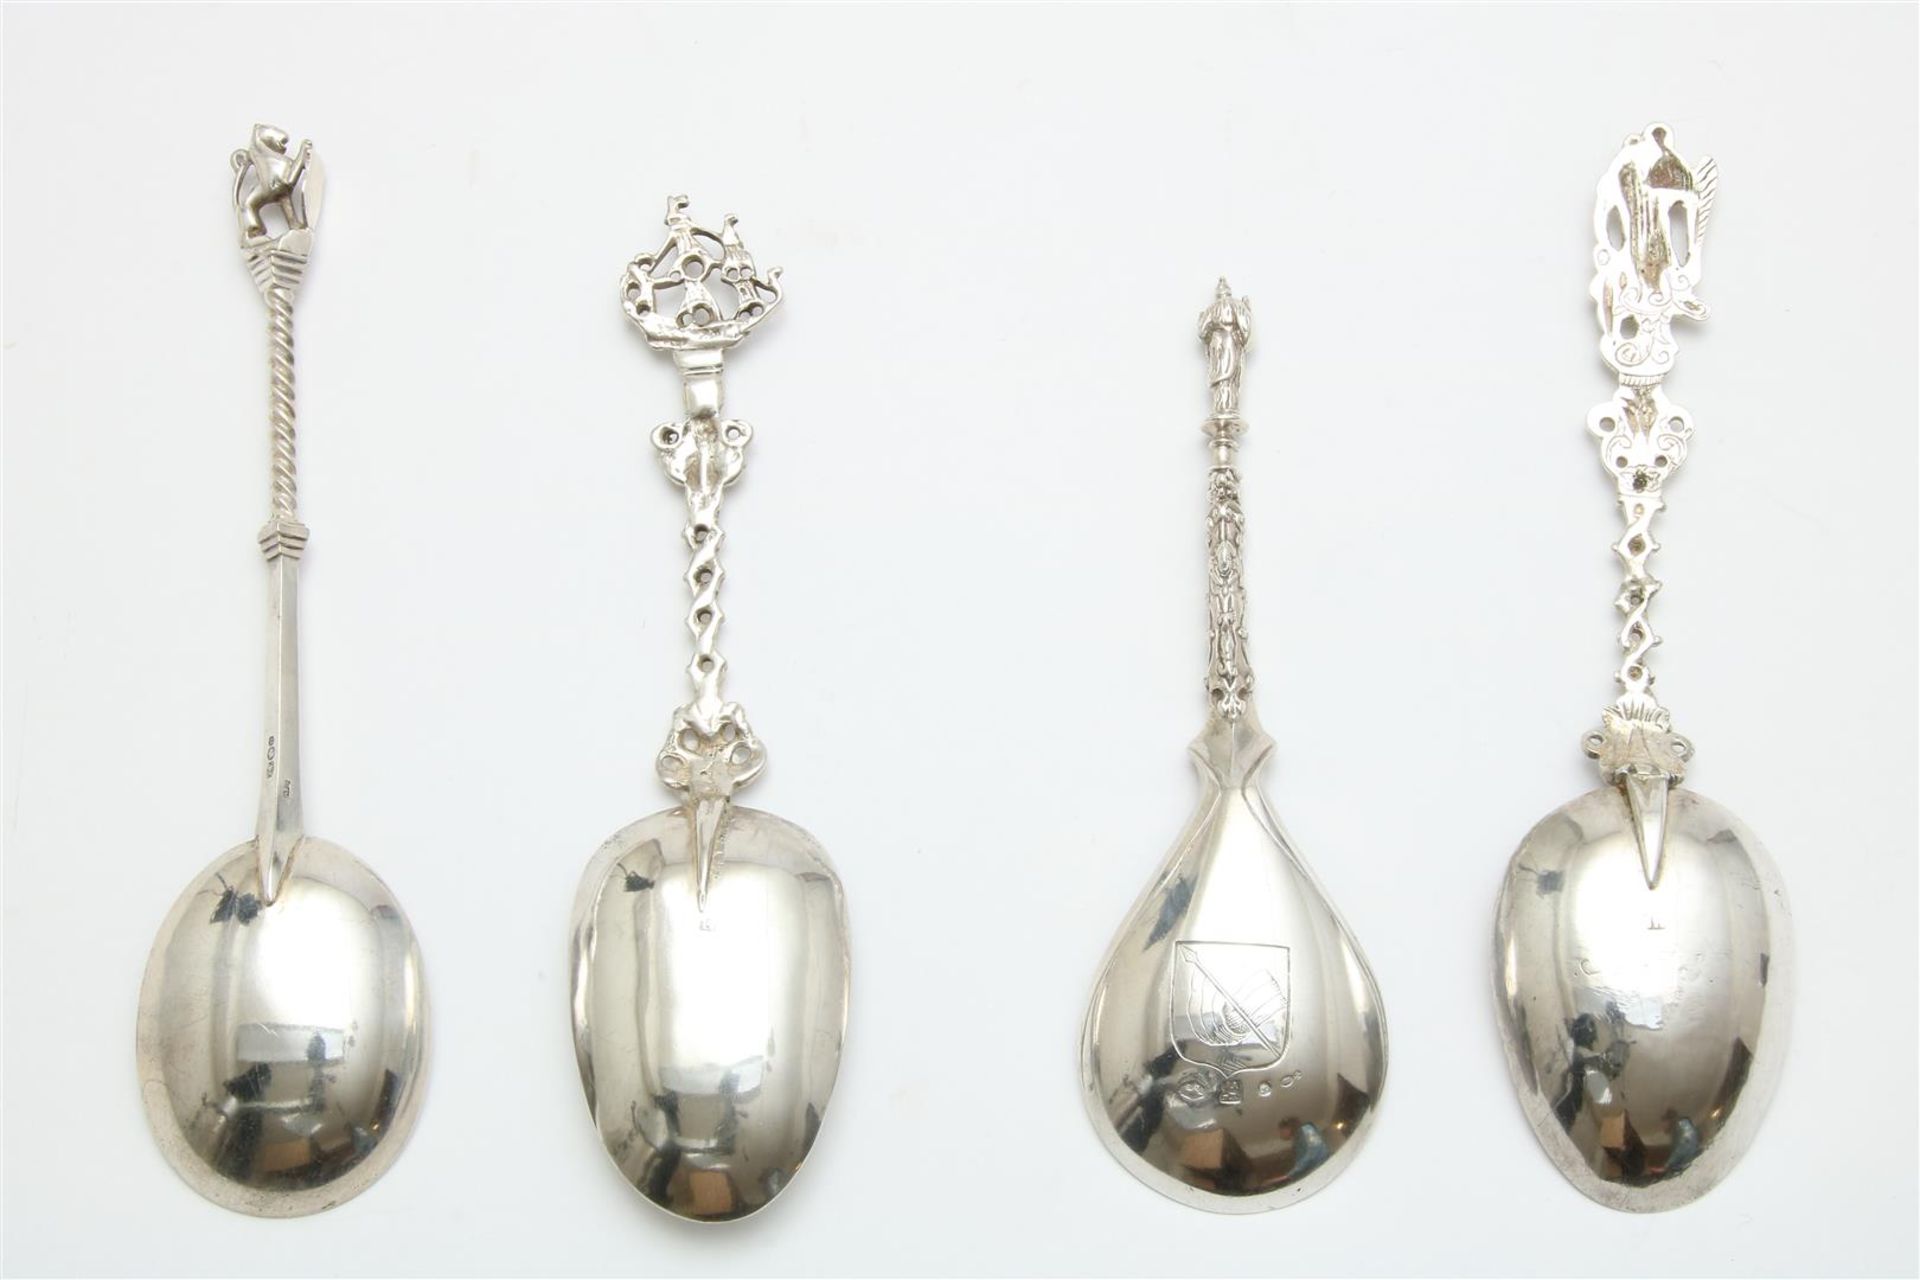 Lot with 4 silver memorial spoons, including crowned with lion, apostle, boat, maternal love, - Image 2 of 2